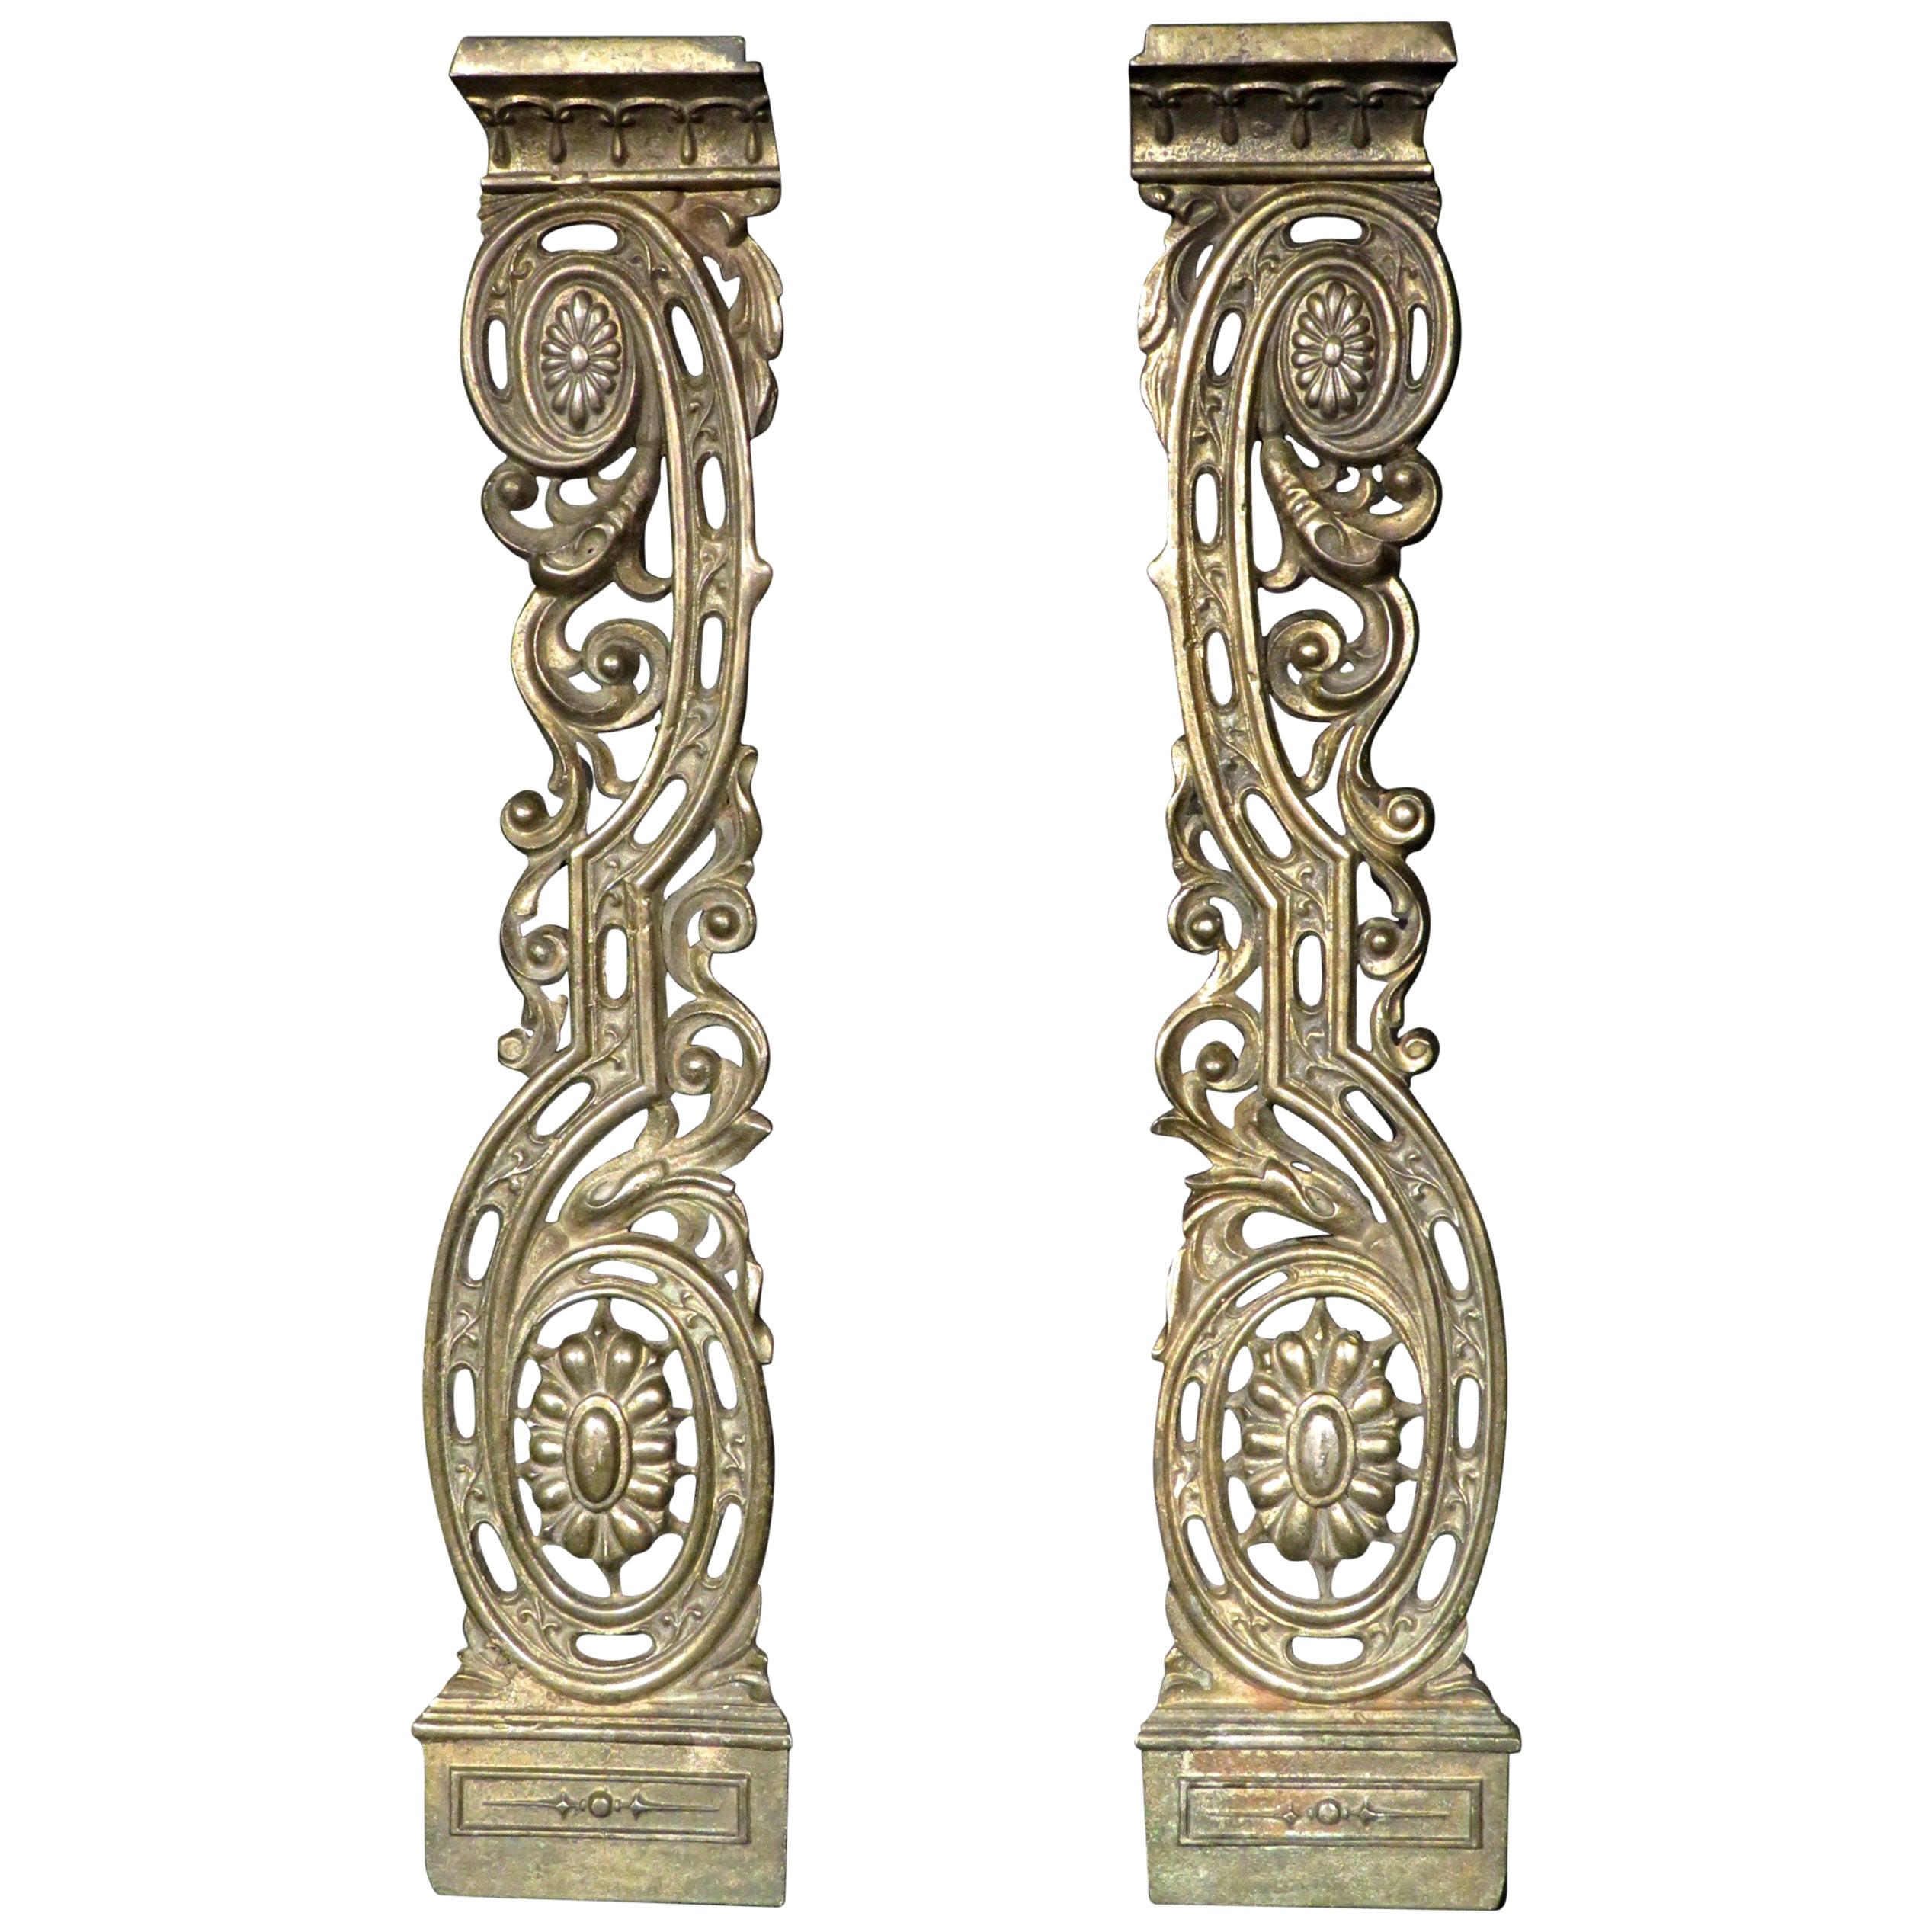 Pair of 19th Century Neoclassical Inspired Ormolu Architectural Elements